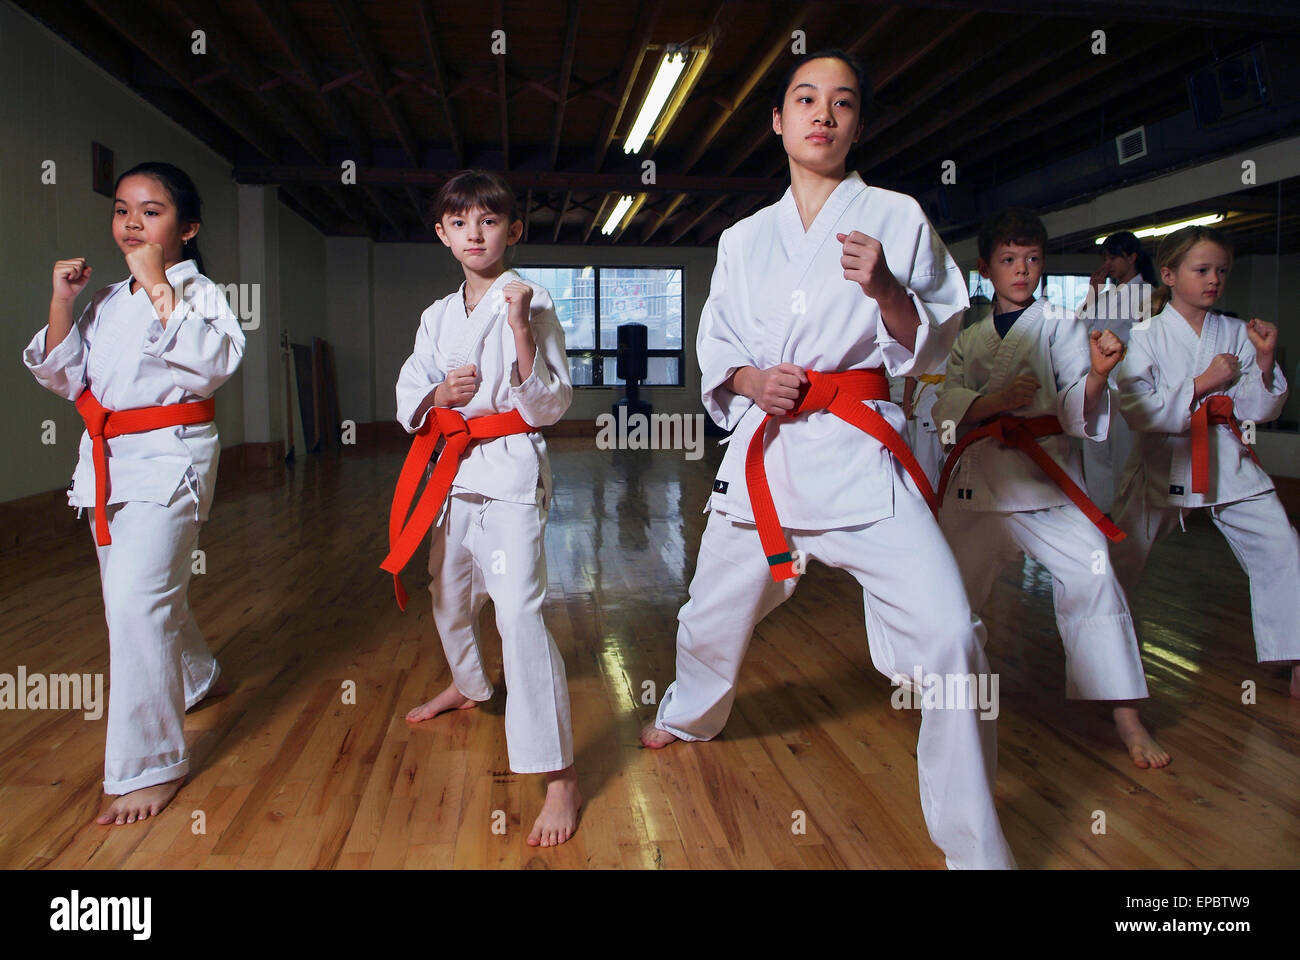 Kids demonstrating moves in karate class Stock Photo